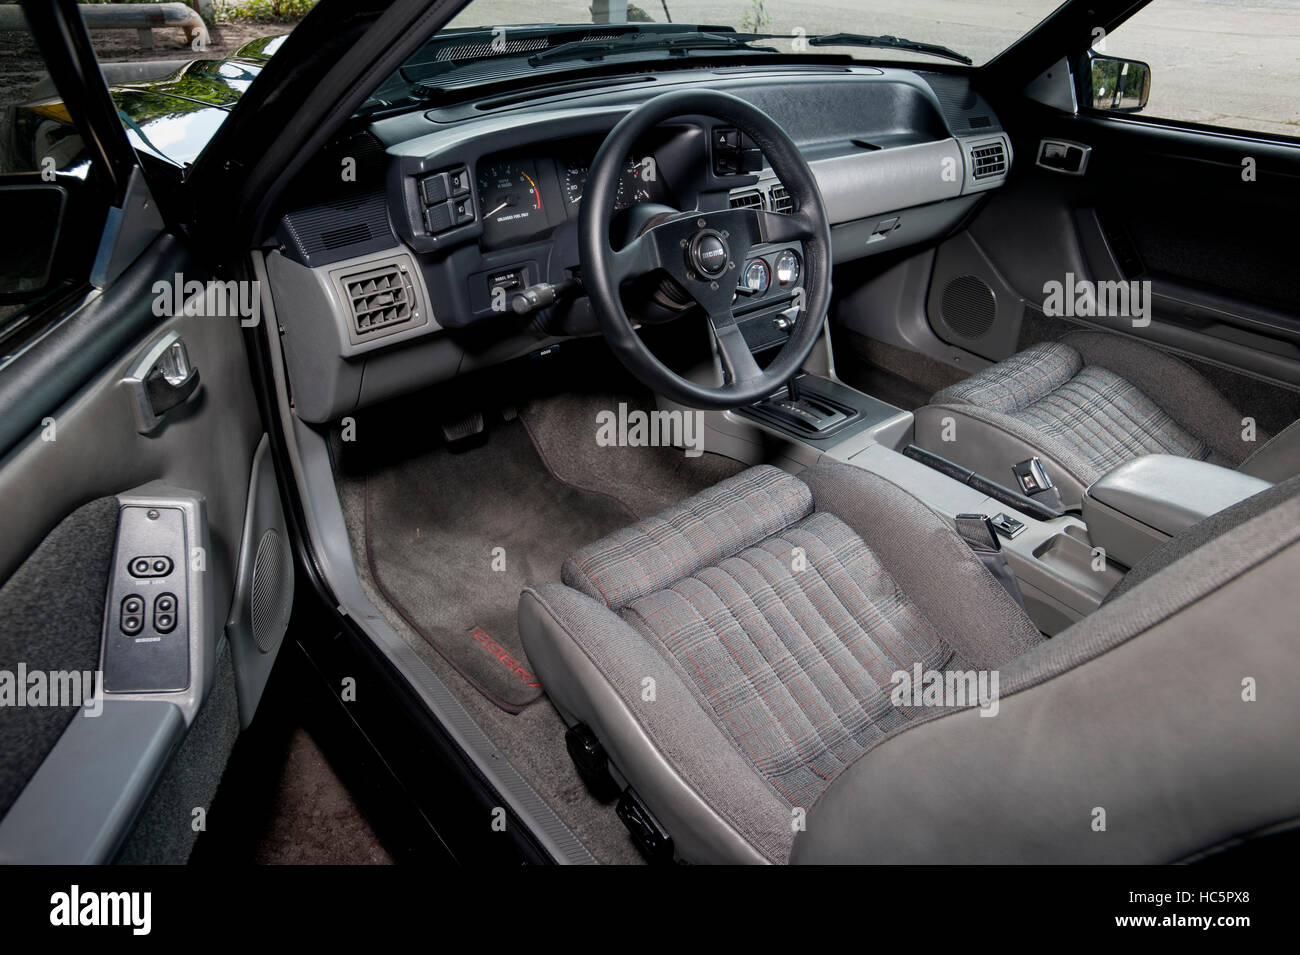 1989 Fox Body Shape Ford Mustang Gt Interior Stock Photo